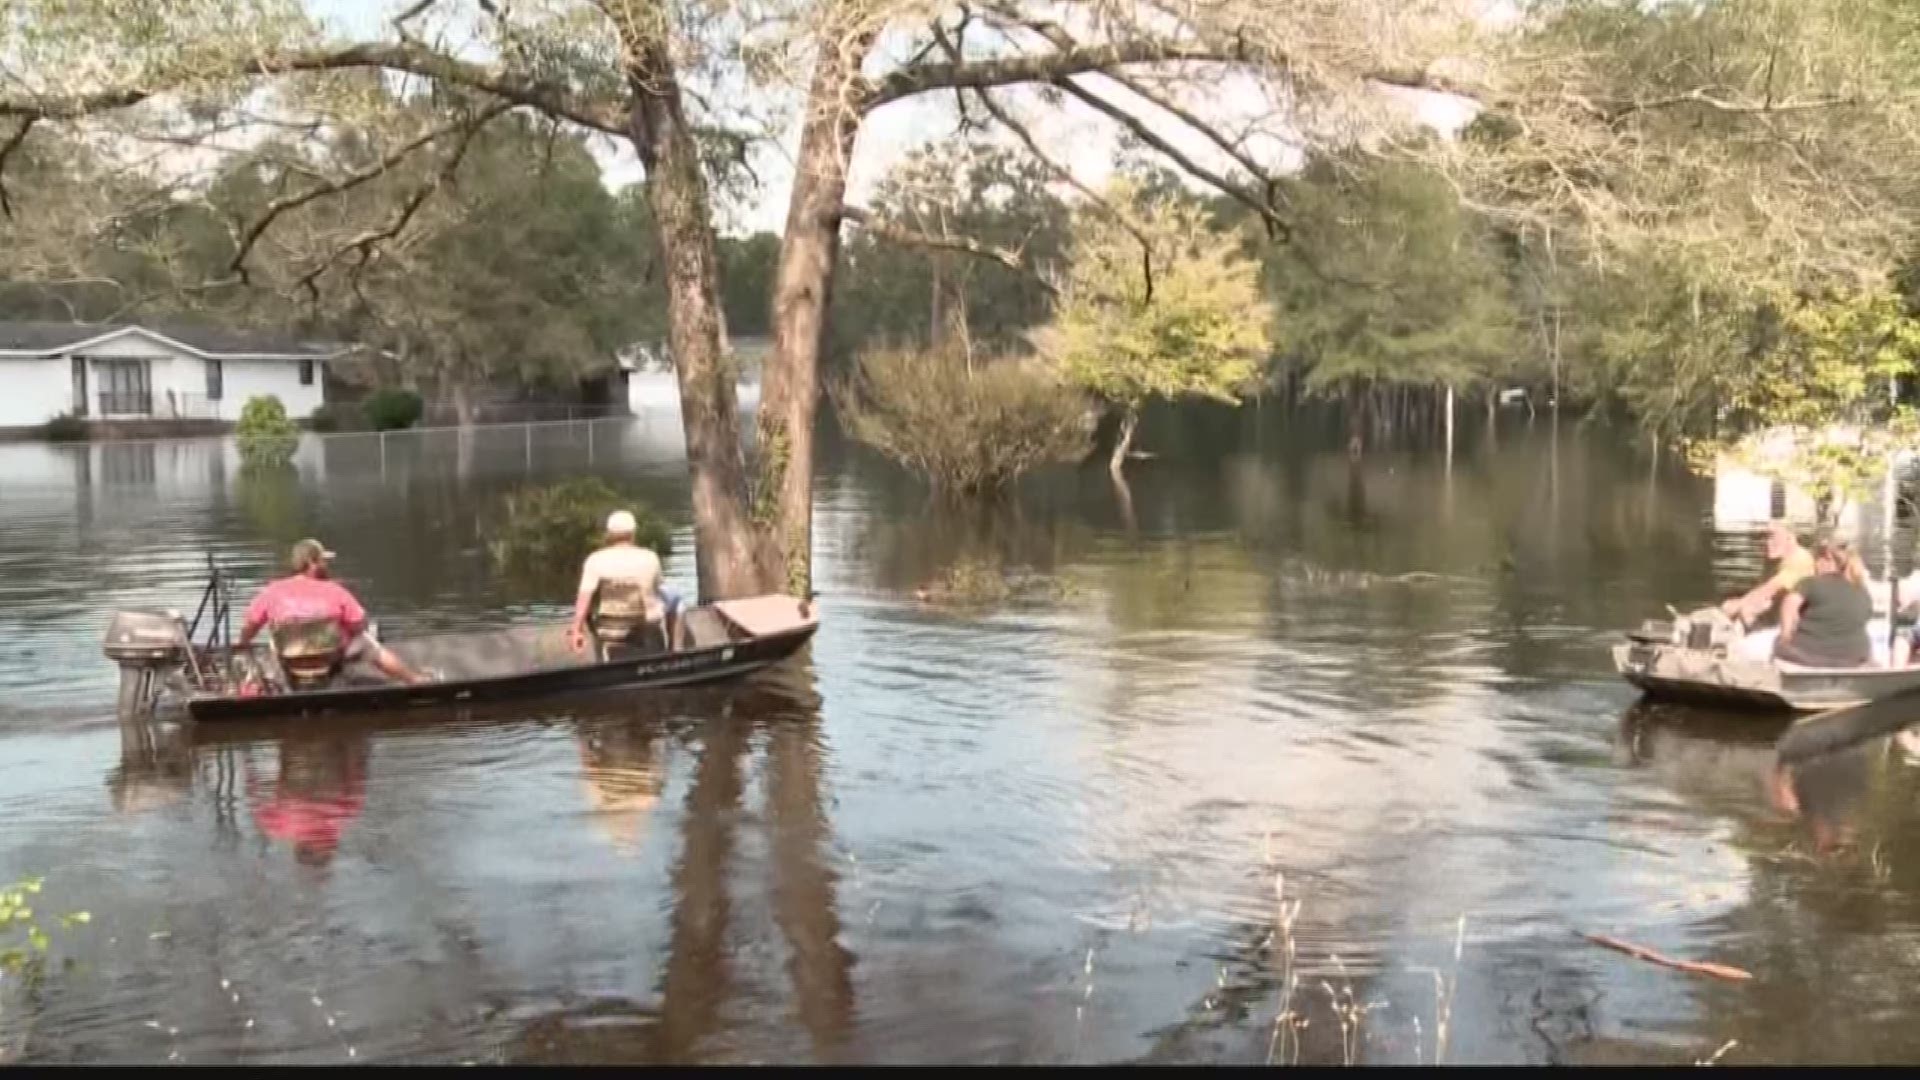 Marion County residents are being warned about rising levels around the Pee Dee river.